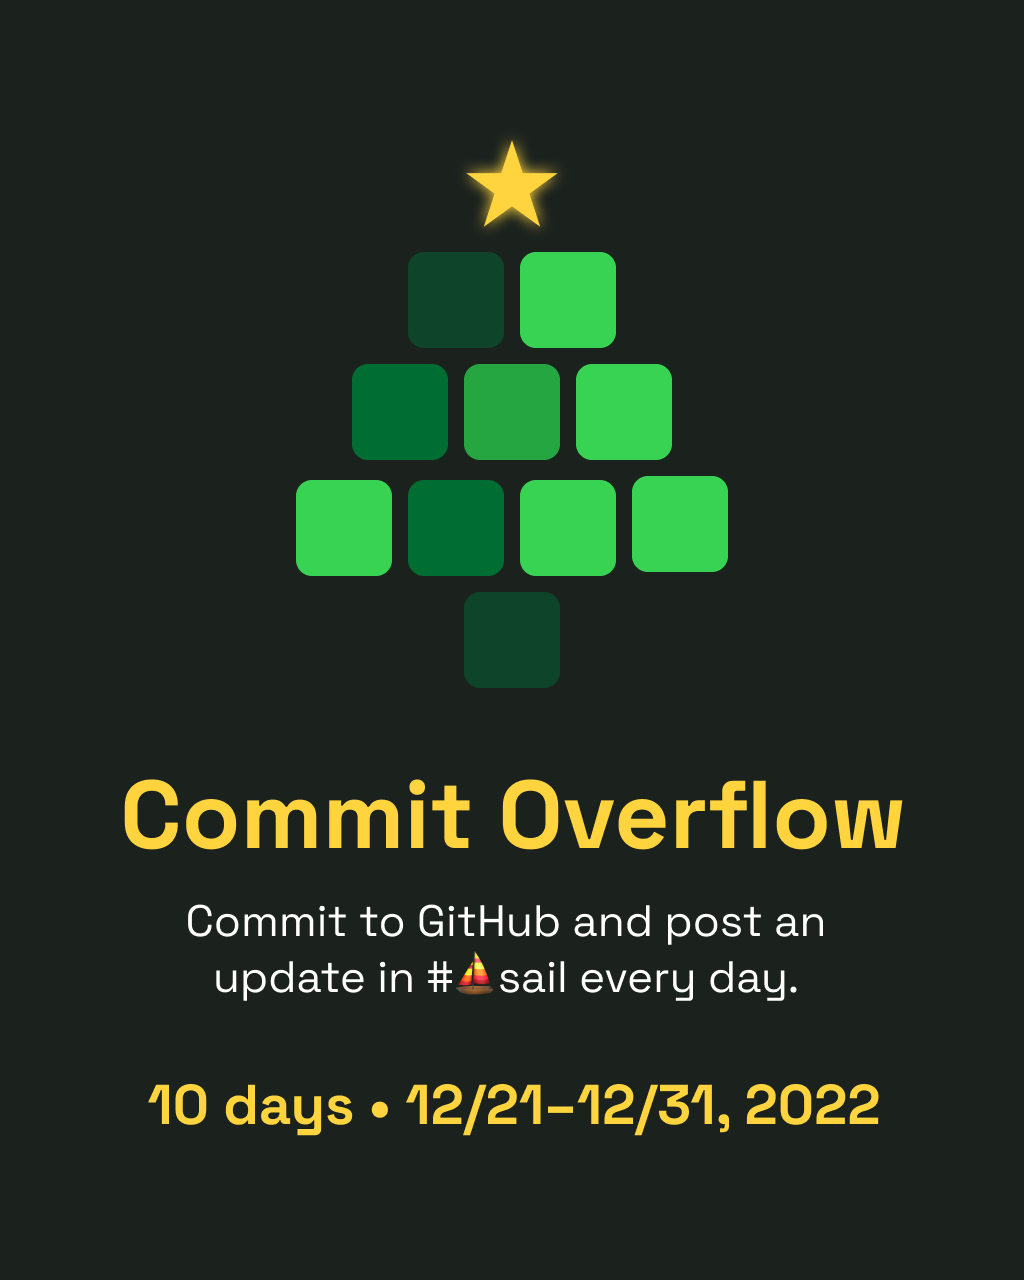 Poster advertising Commit Overflow. A tree made out of 10 squares colored different shades of green with a star at the top. Below, "Commit Overflow", "Commit to GitHub and post an update in #sail every day.", "10 days, 12/21-12/31, 2022"